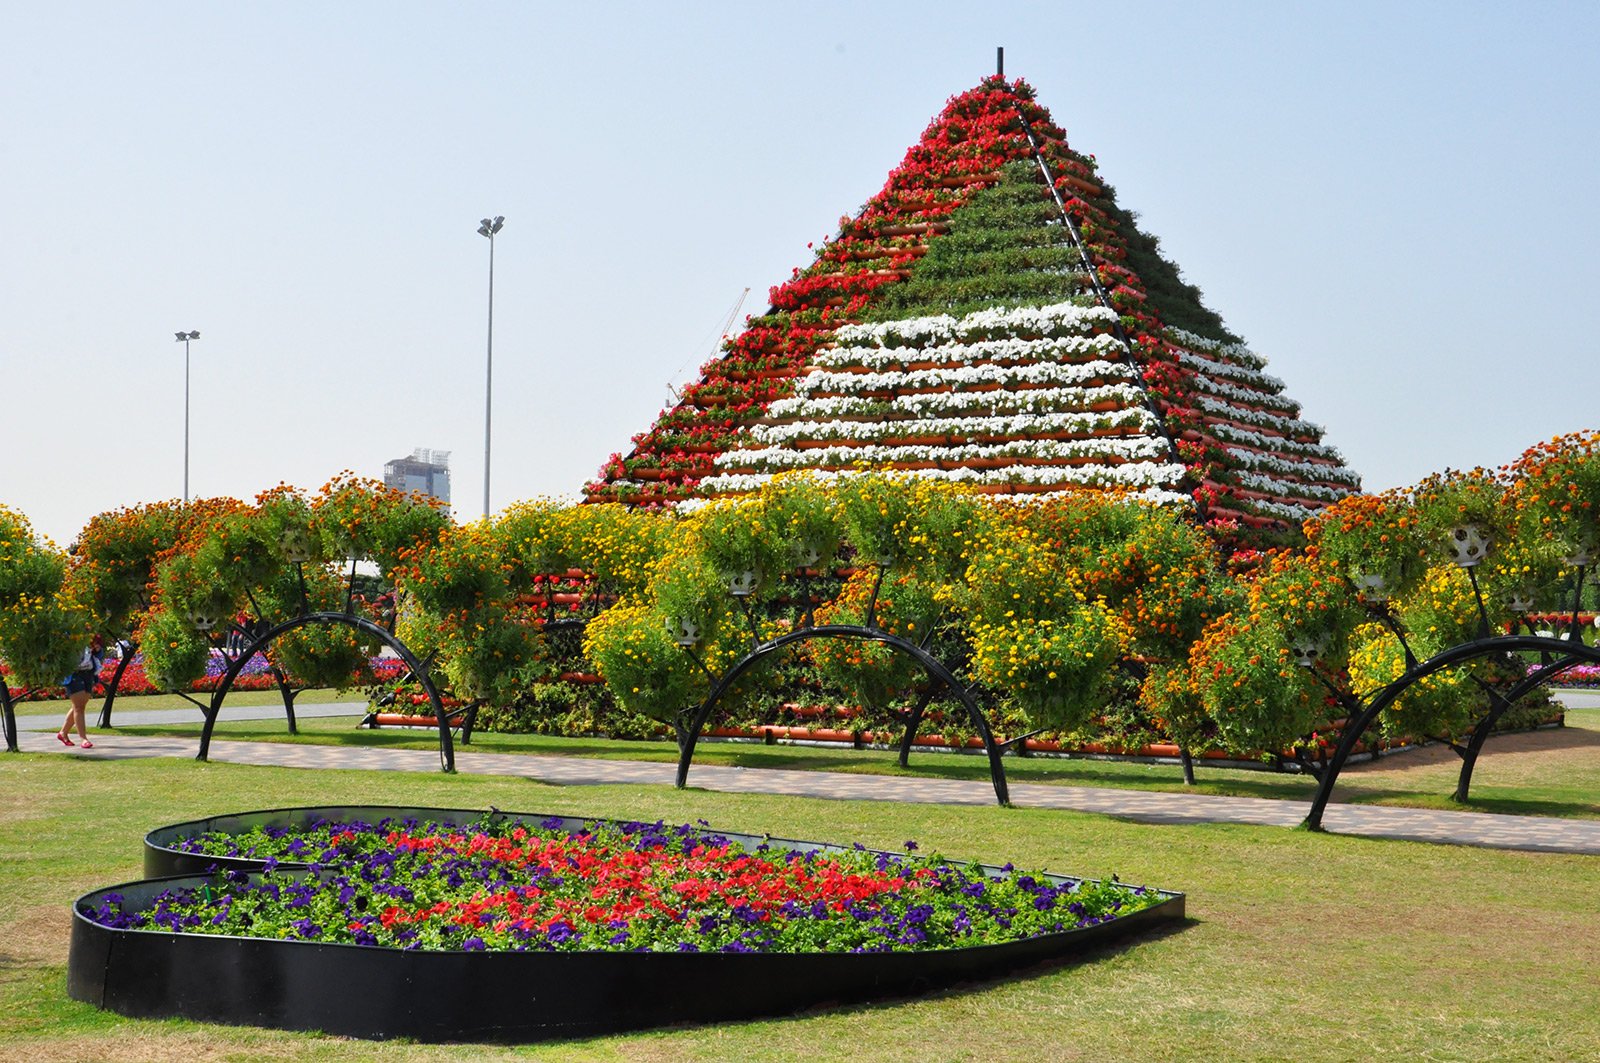 How to see a 10-meter Flower Pyramid in Dubai